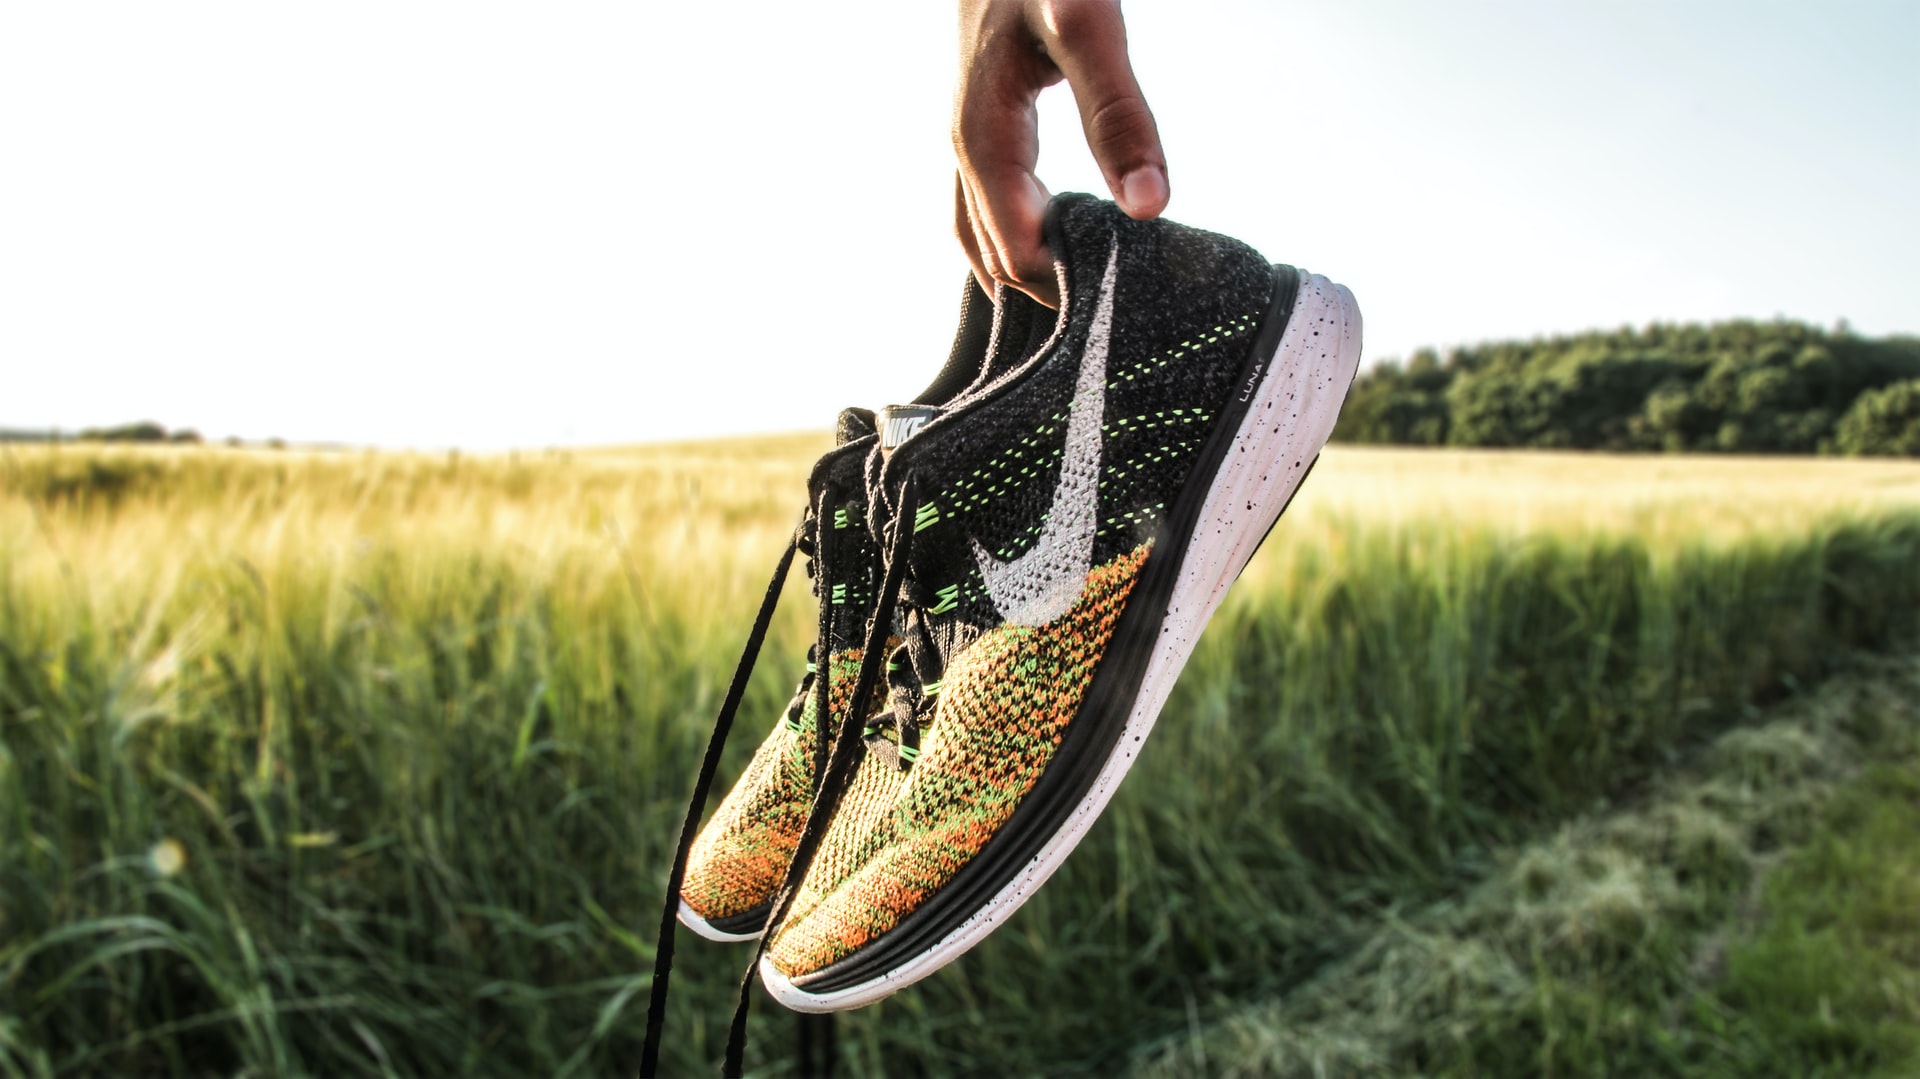 Top 5 Best Shoes for Running on Grass – Top Picks